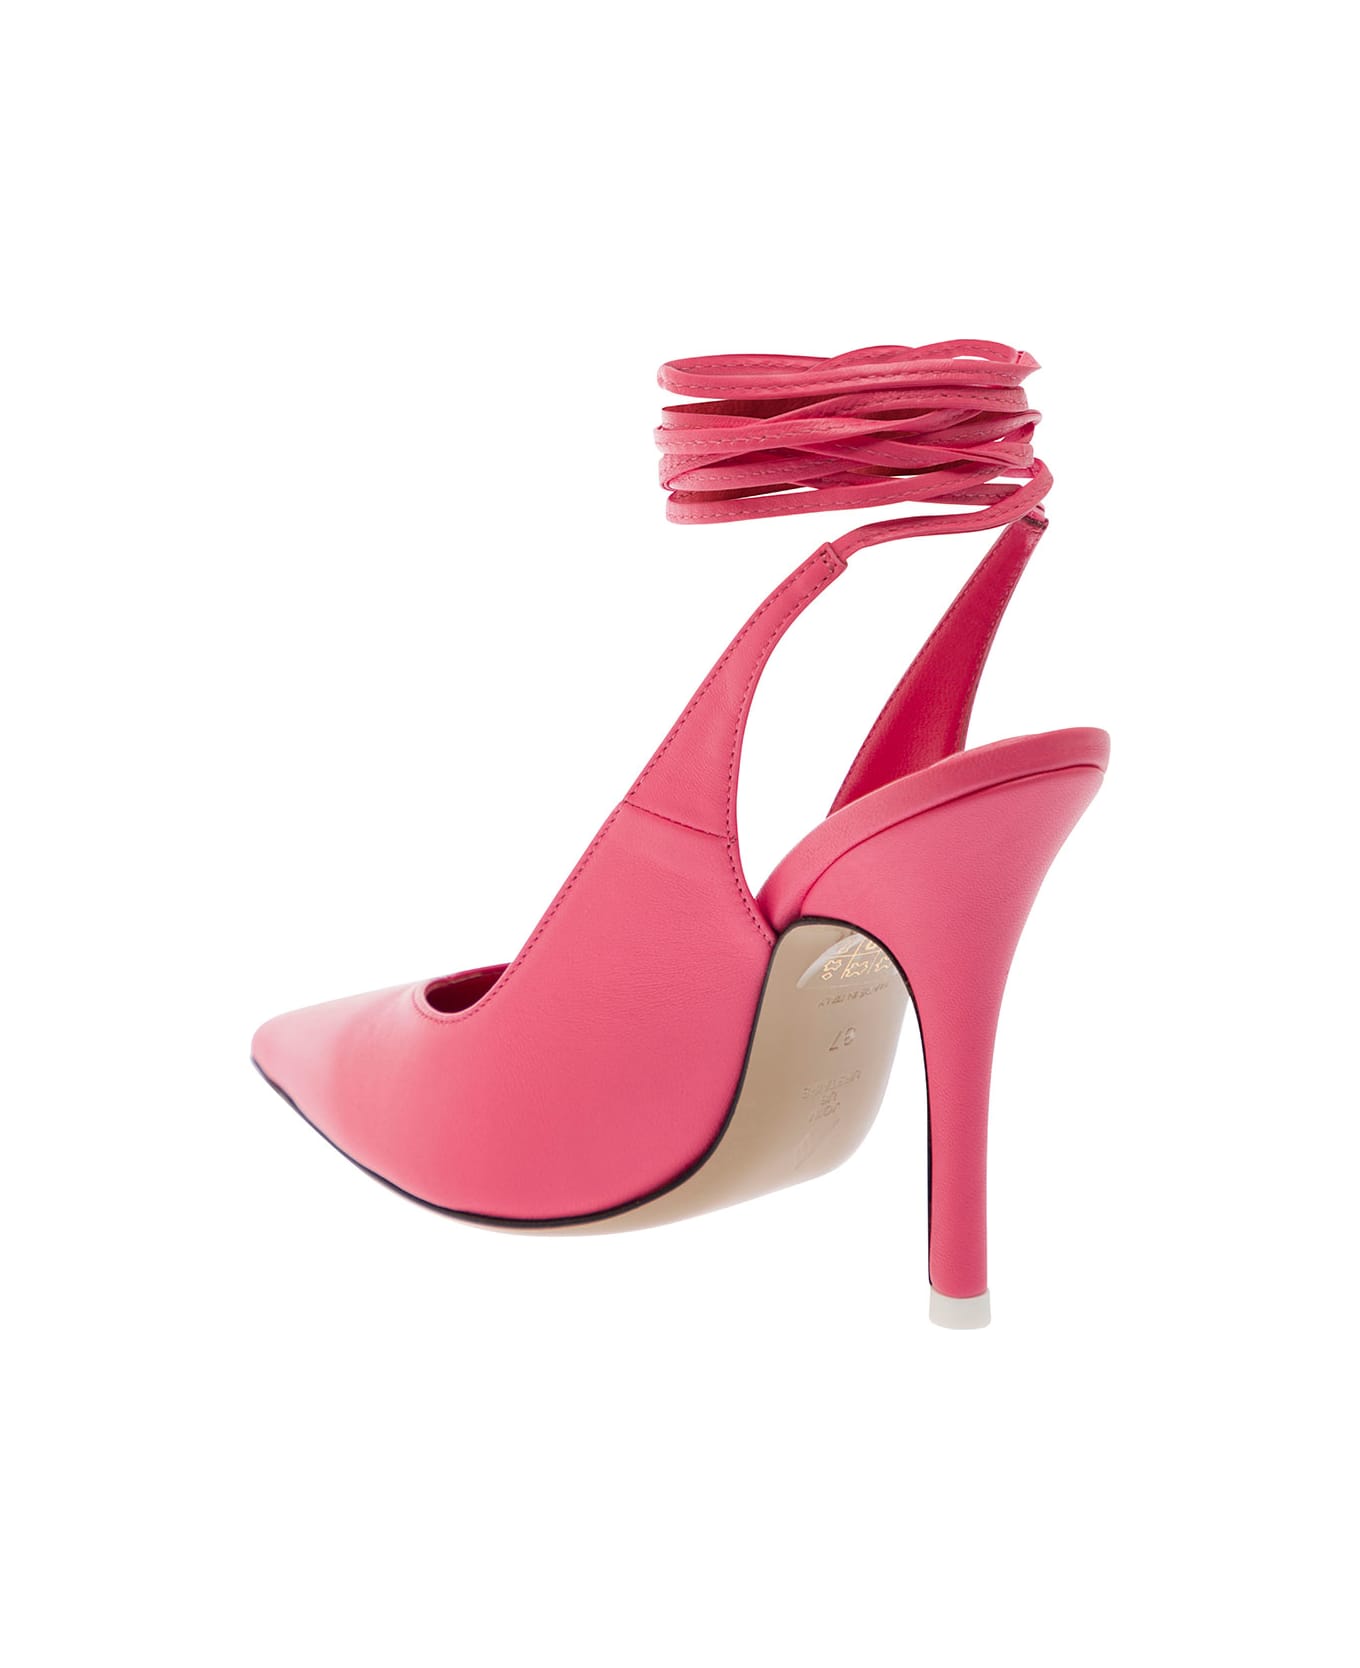 The Attico Pointed Toe Pumps With Strap Detail In Pink Leather Woman - Pink ハイヒール